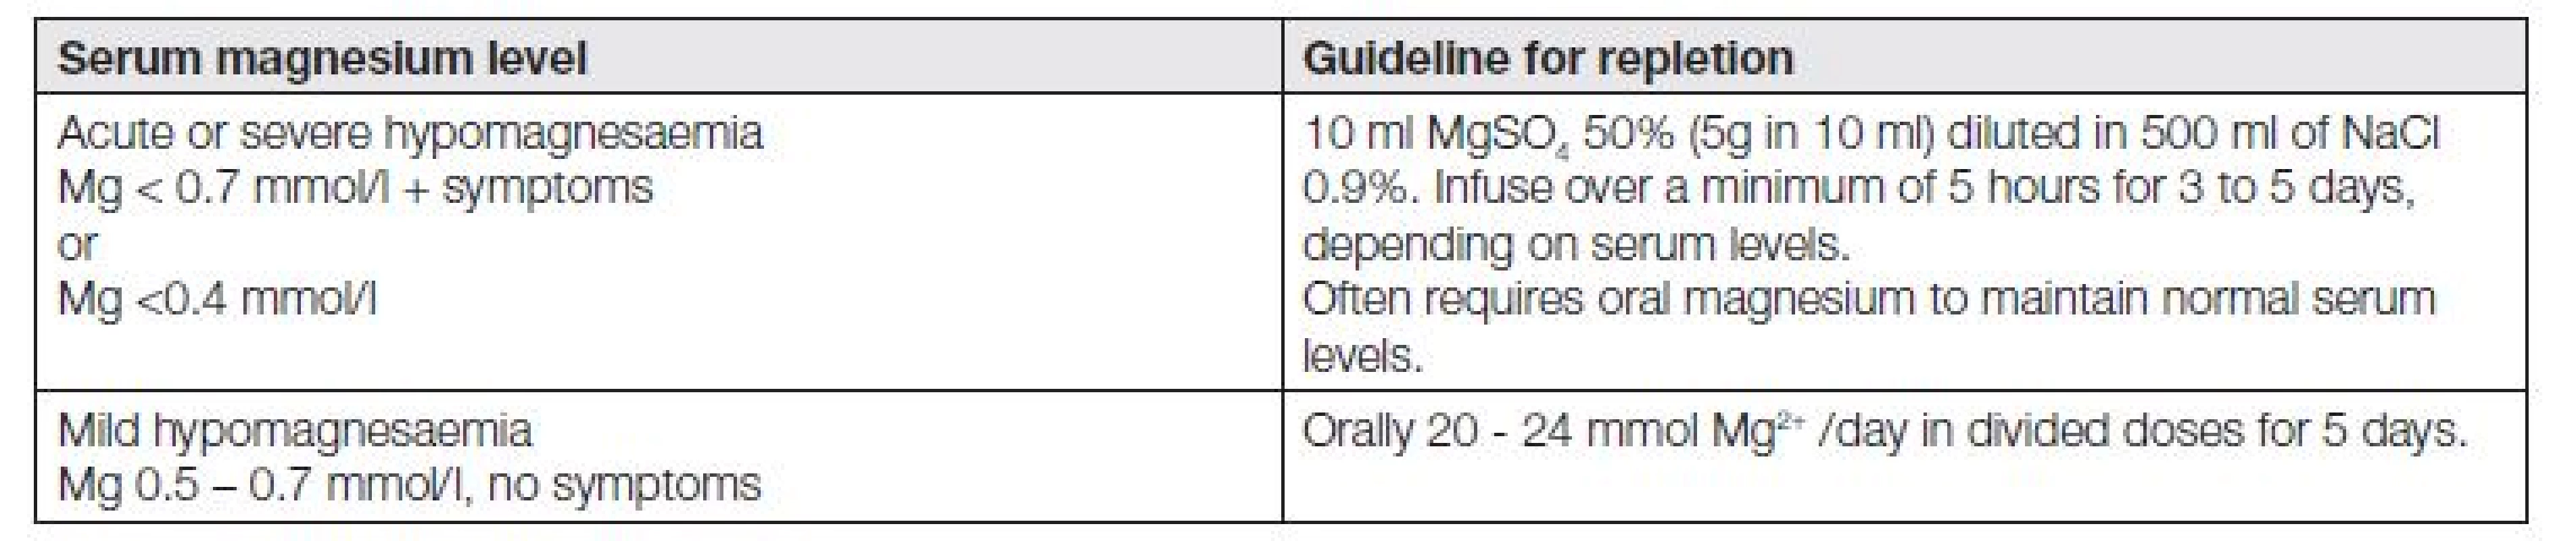 Guidelines for Magnesium replacement [19,31].